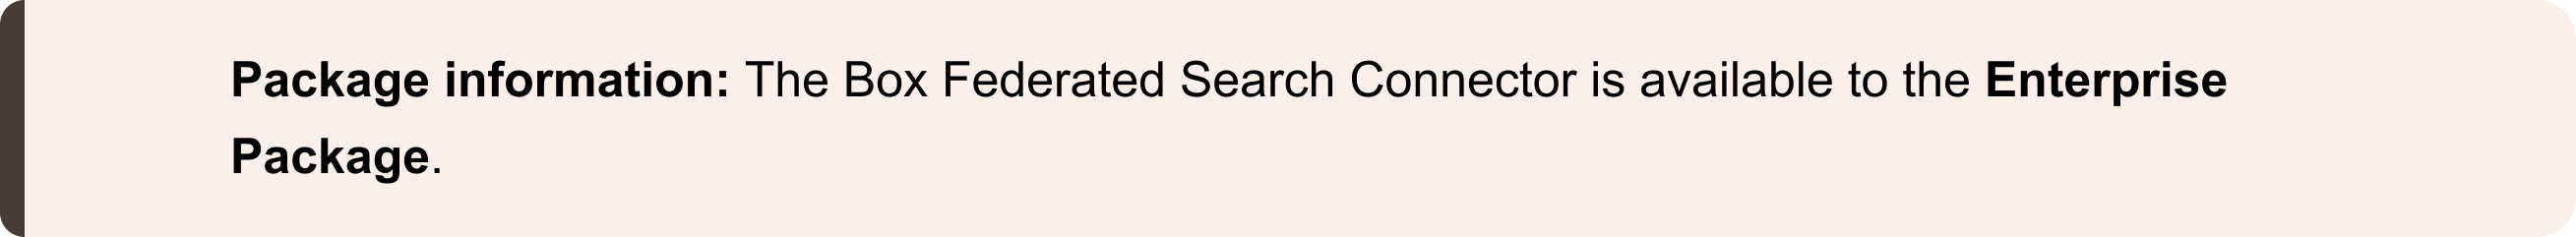 Box_Federated_Search_Connector_1.png